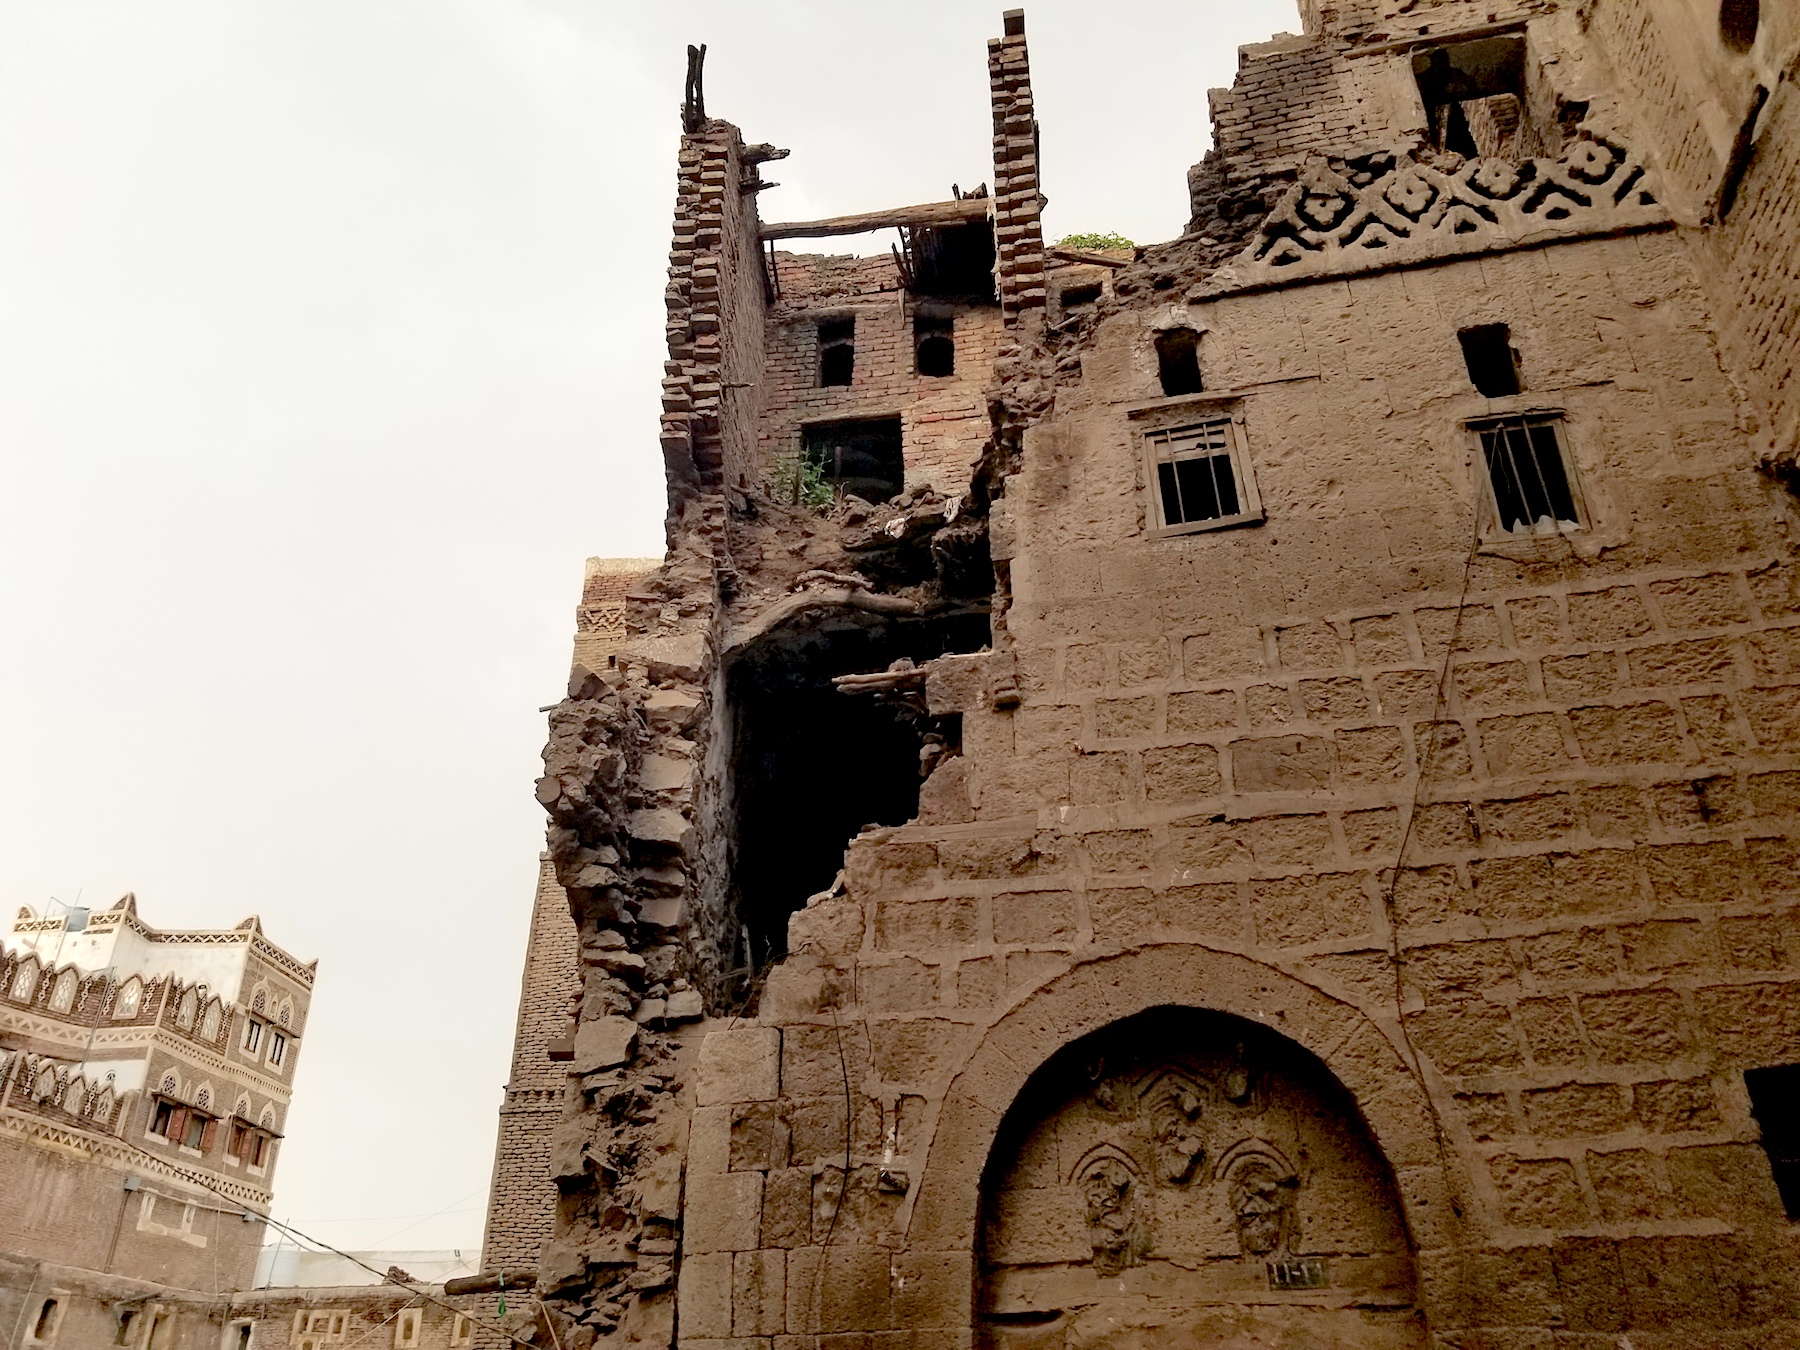 Damaged ancient building in Sanaa's Old City